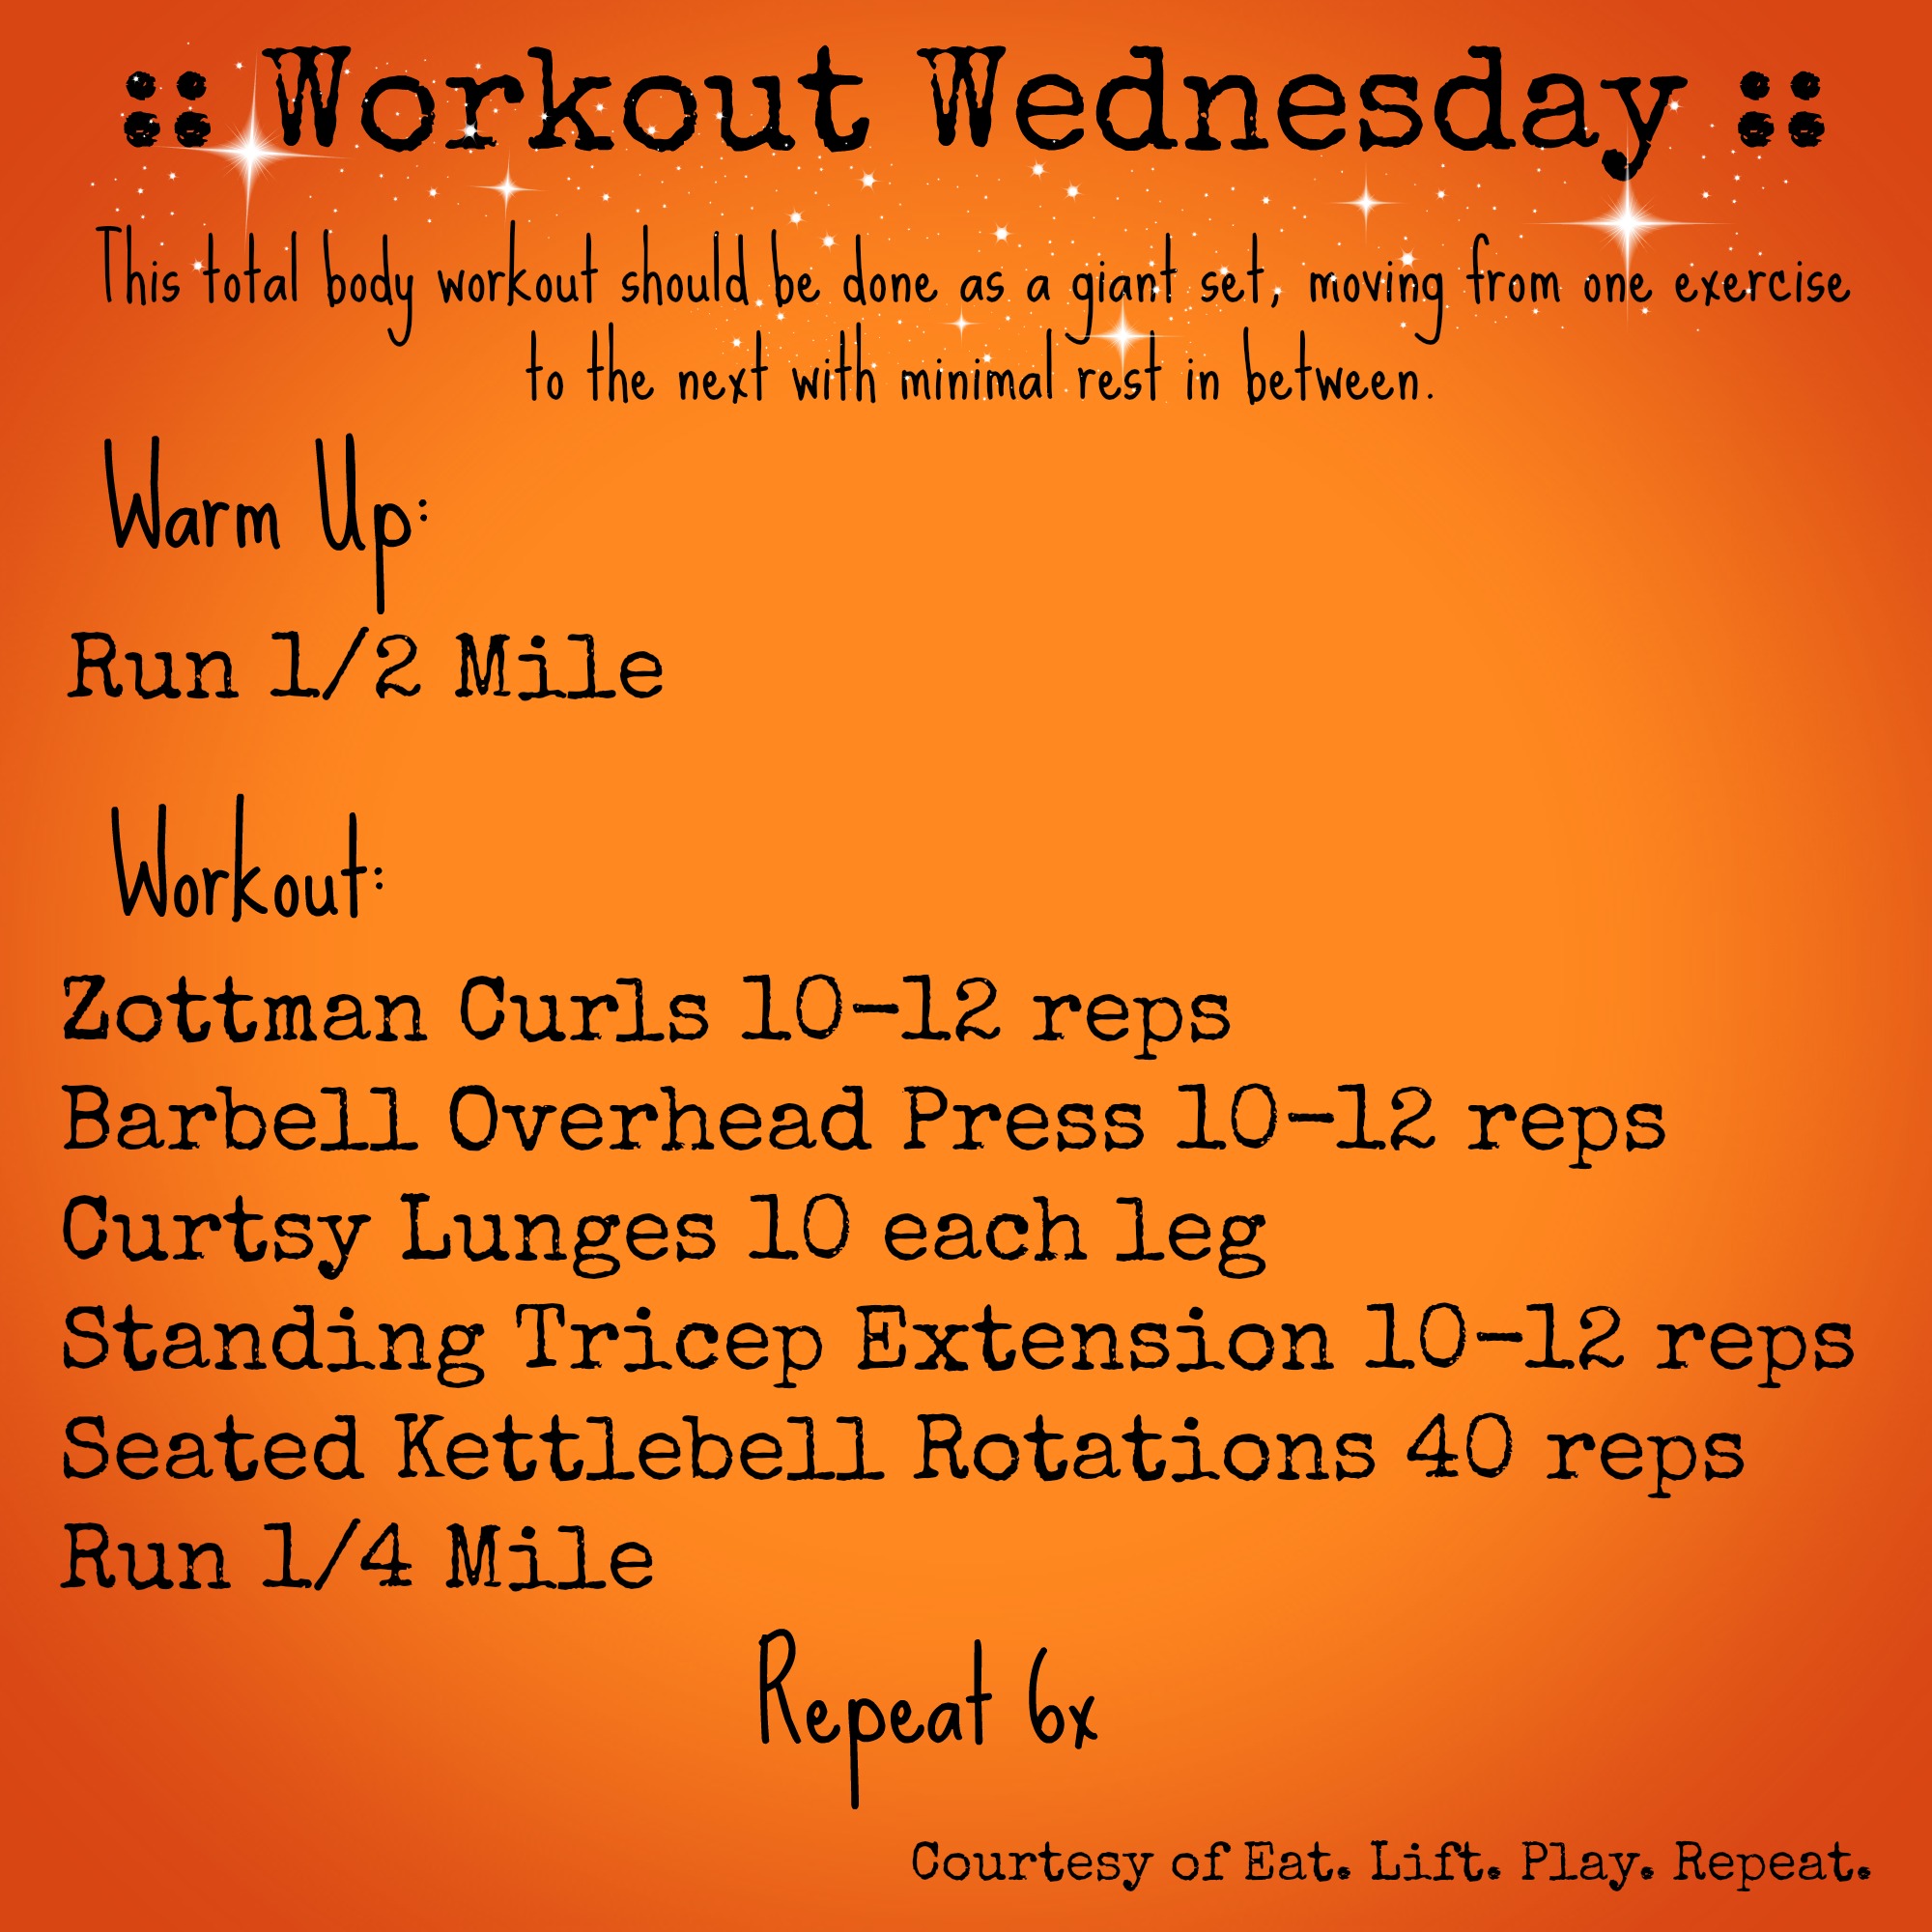 http://eatliftplayrepeat.com/wp-content/uploads/2015/11/Workout-Wednesday-Total-Body-2-mile-run.jpg